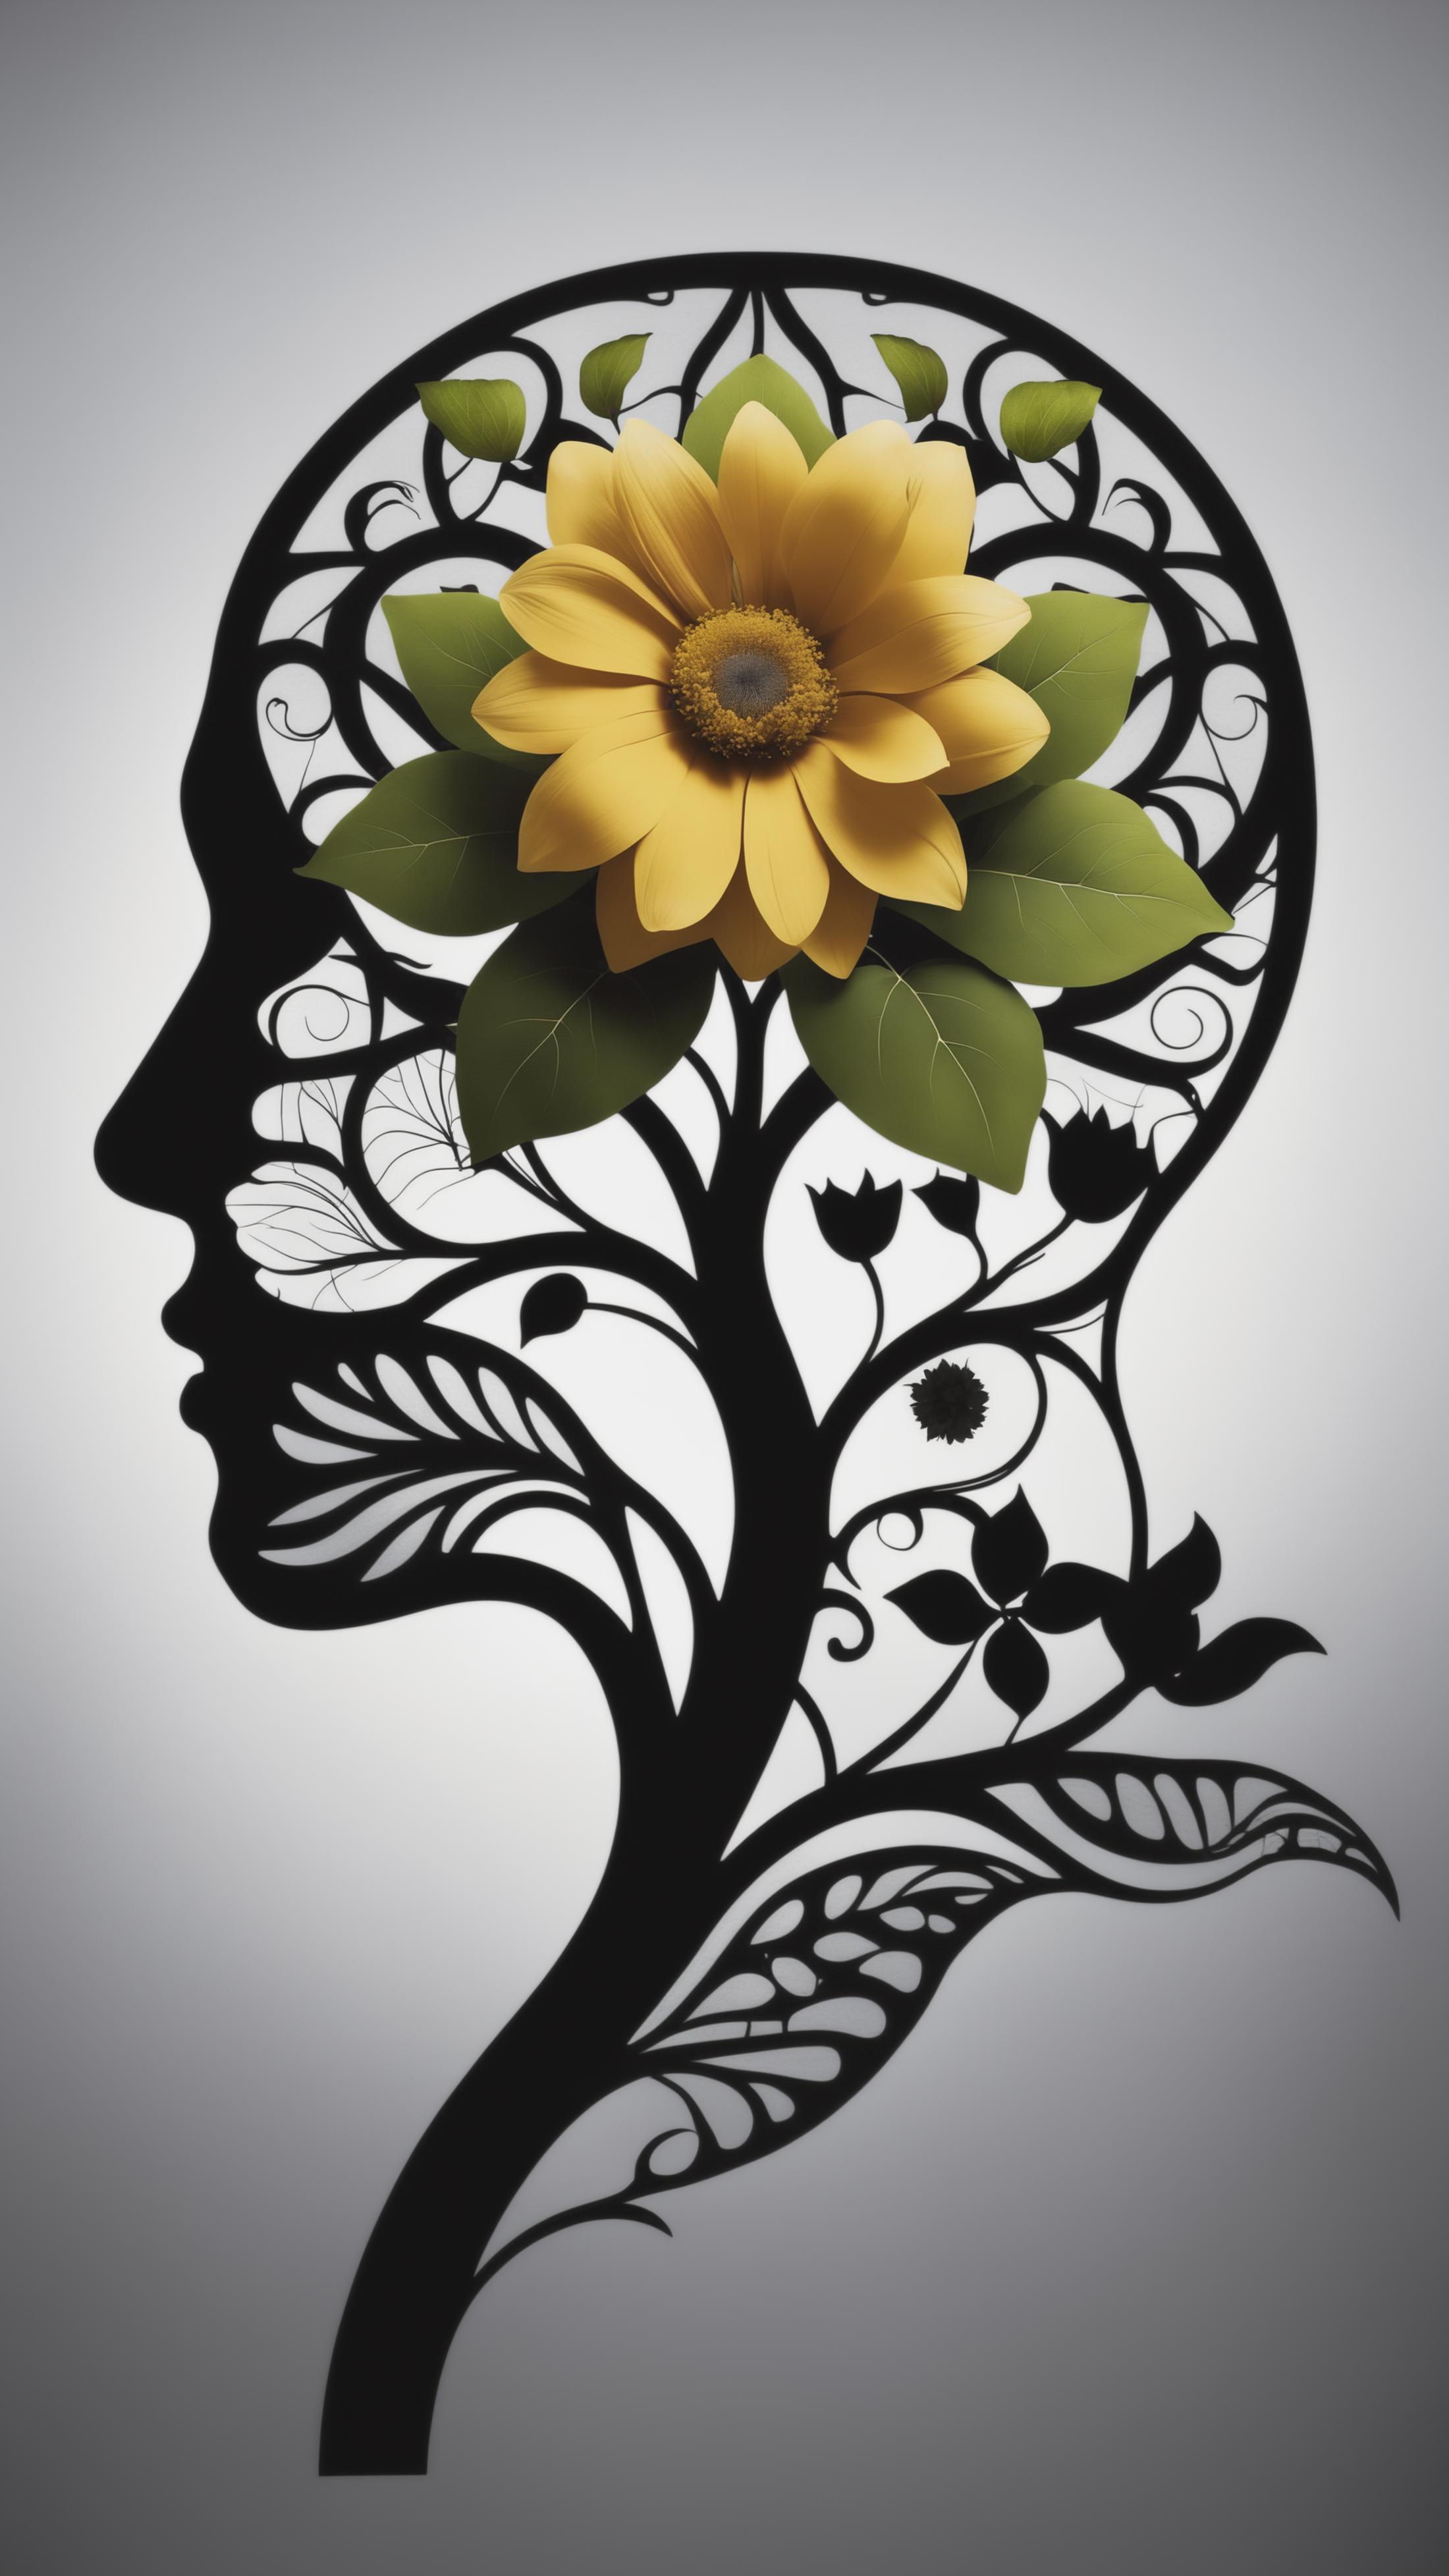 Decorative Flowers in a Woman's Hair - Artistic Silhouette Illustration